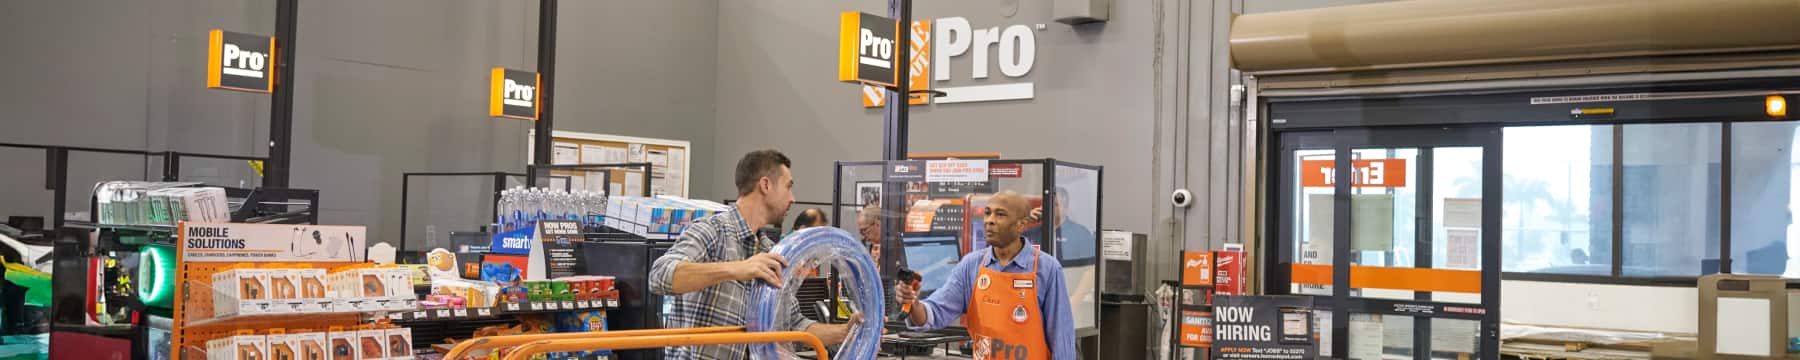 a pro checking out at the home depot store